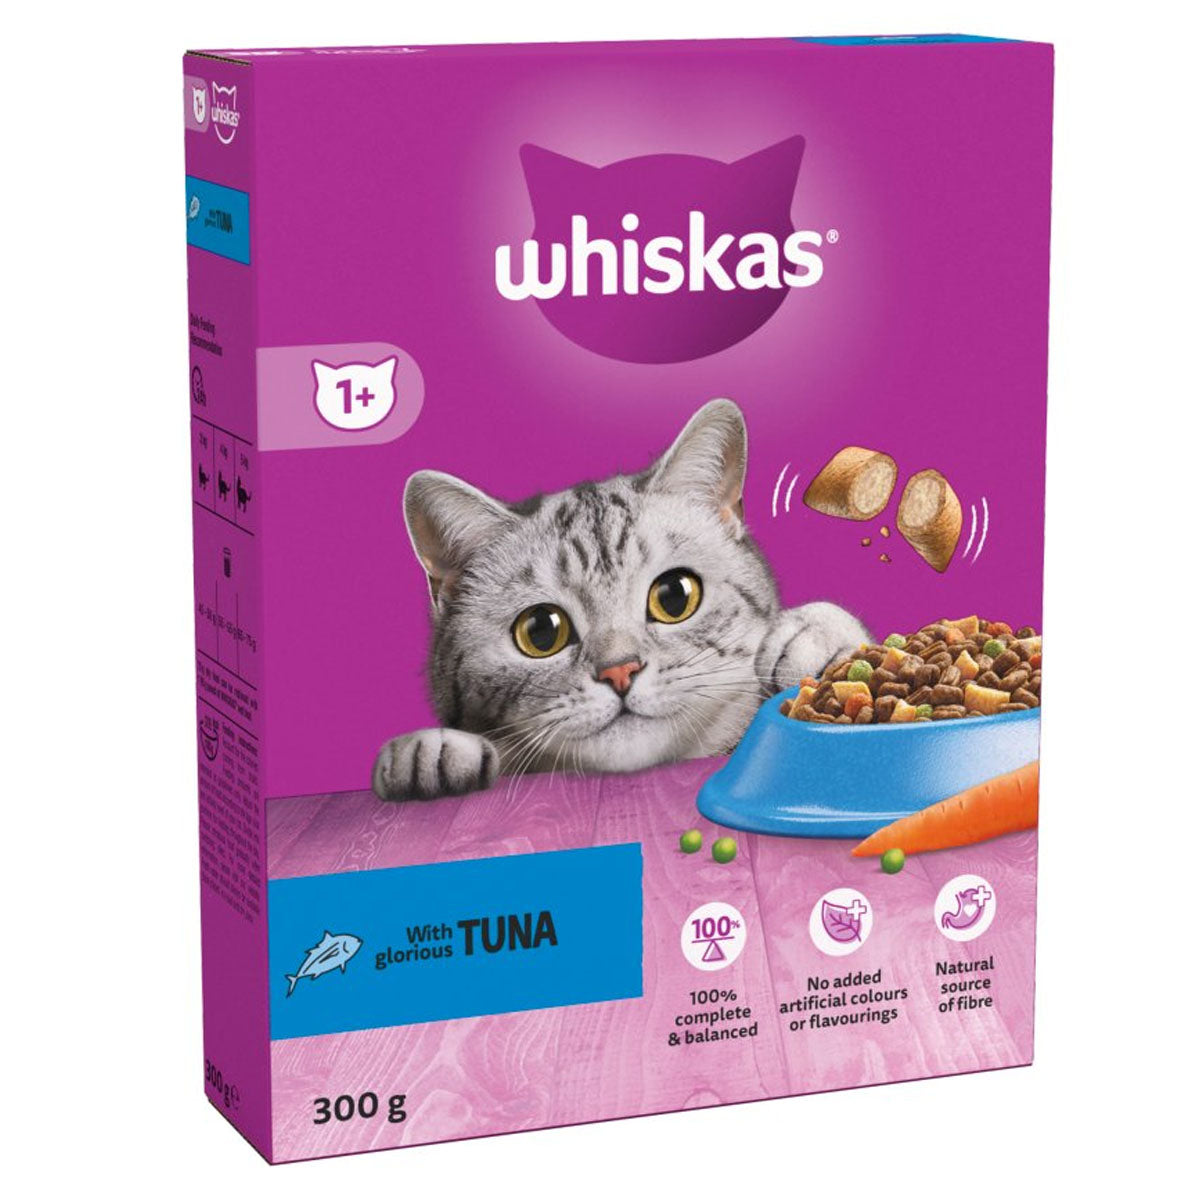 Whiskas - 1+ Adult Dry Cat Food With Tuna - 300g - Continental Food Store